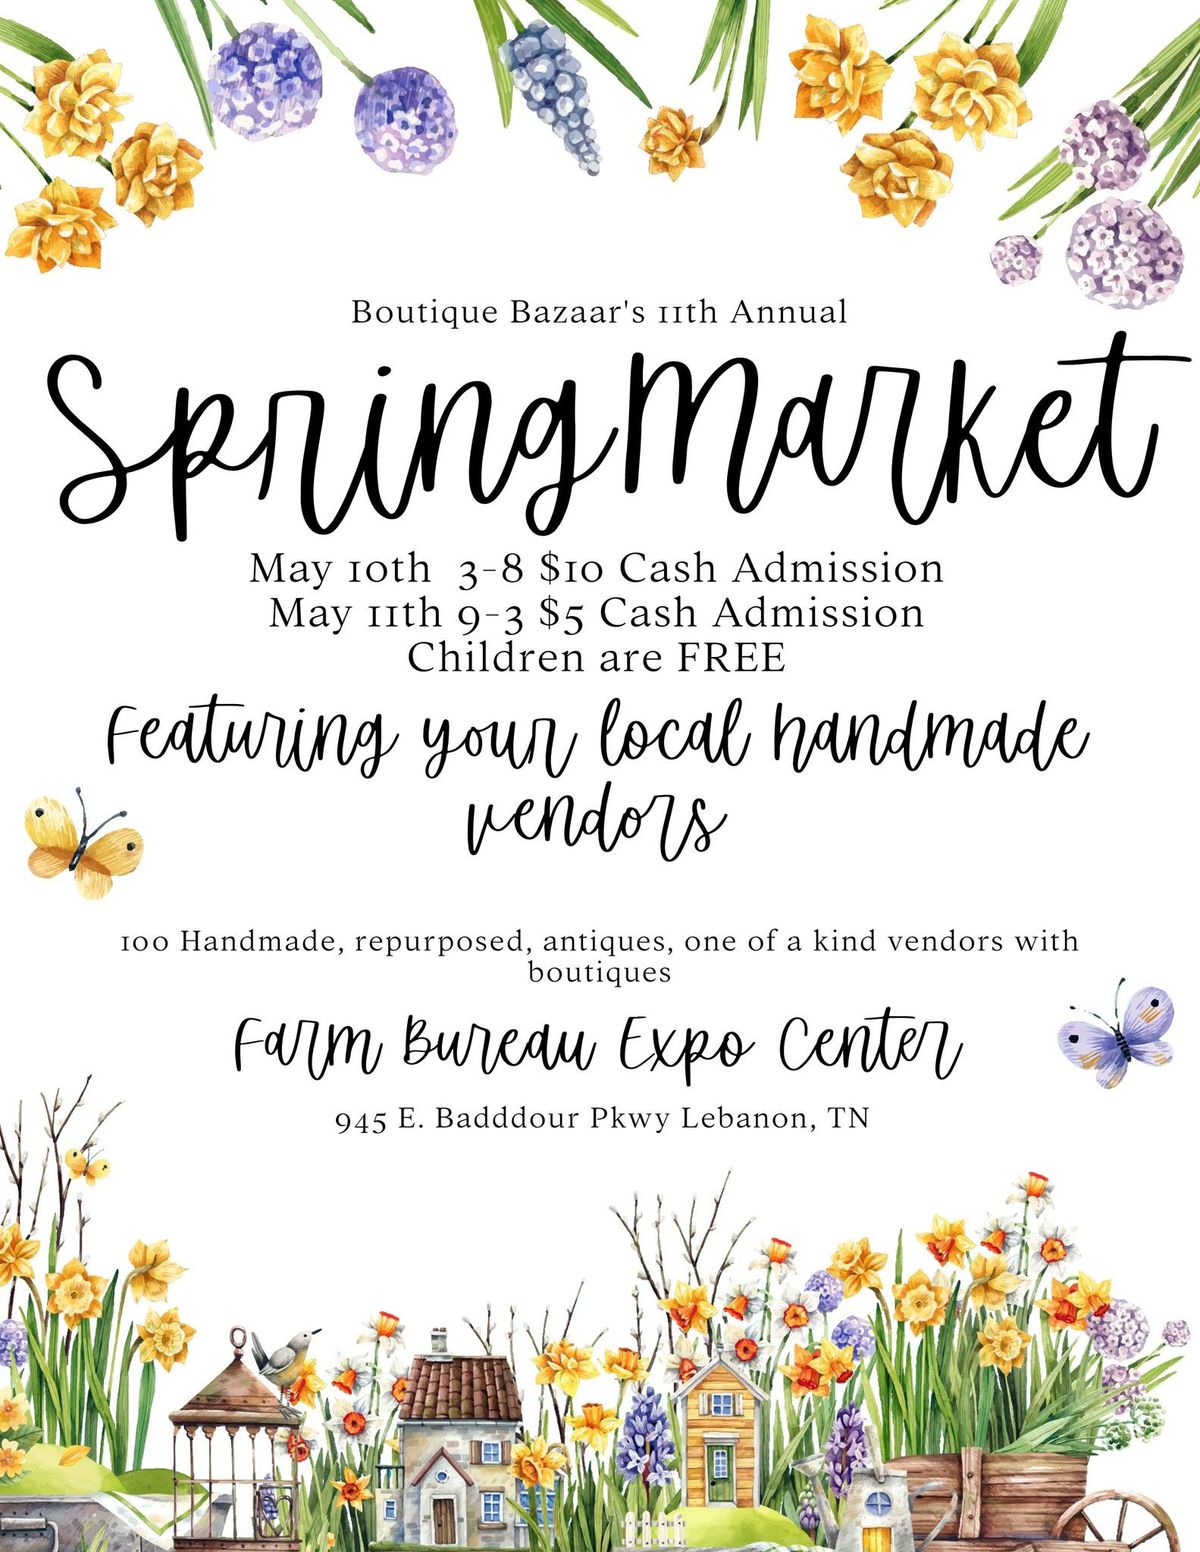 Boutique Bazaar\u2019s 11th Annual Mother's Day Market